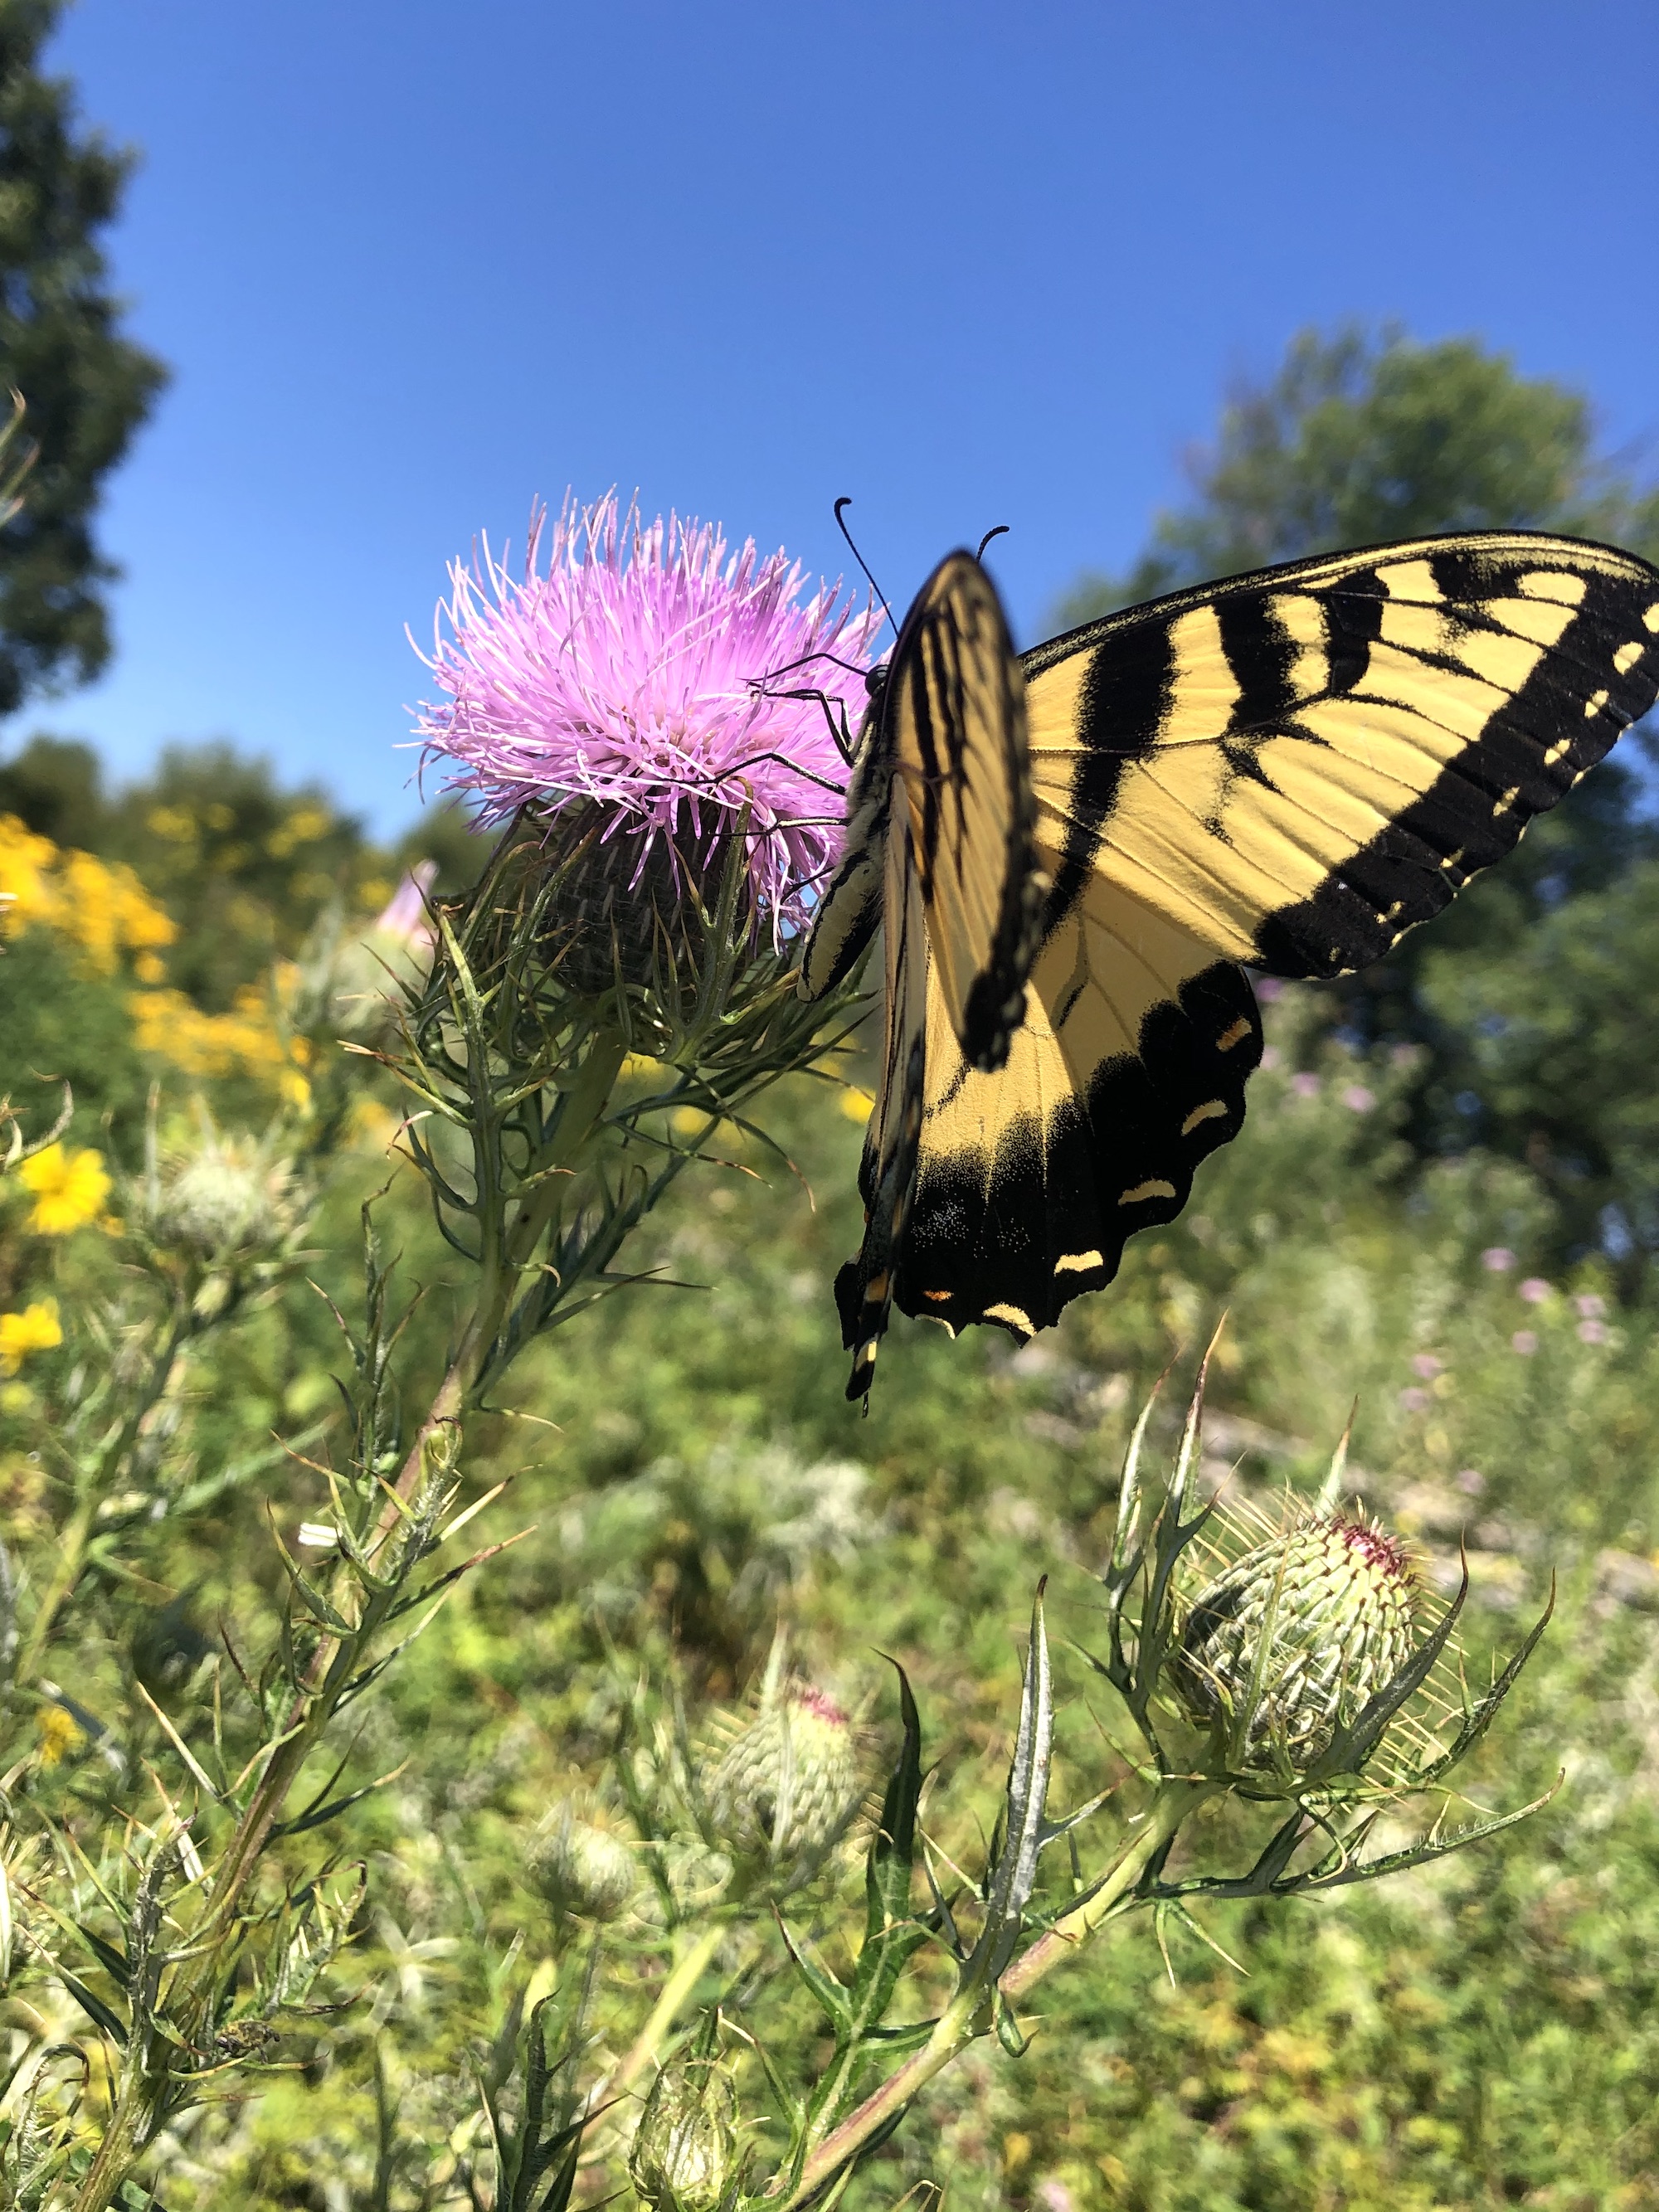 Eastern Swallowtail butterfly on Field Thistle near the Arborteum Visitor's Center in Madison, Wisconsin on August 16, 2020.